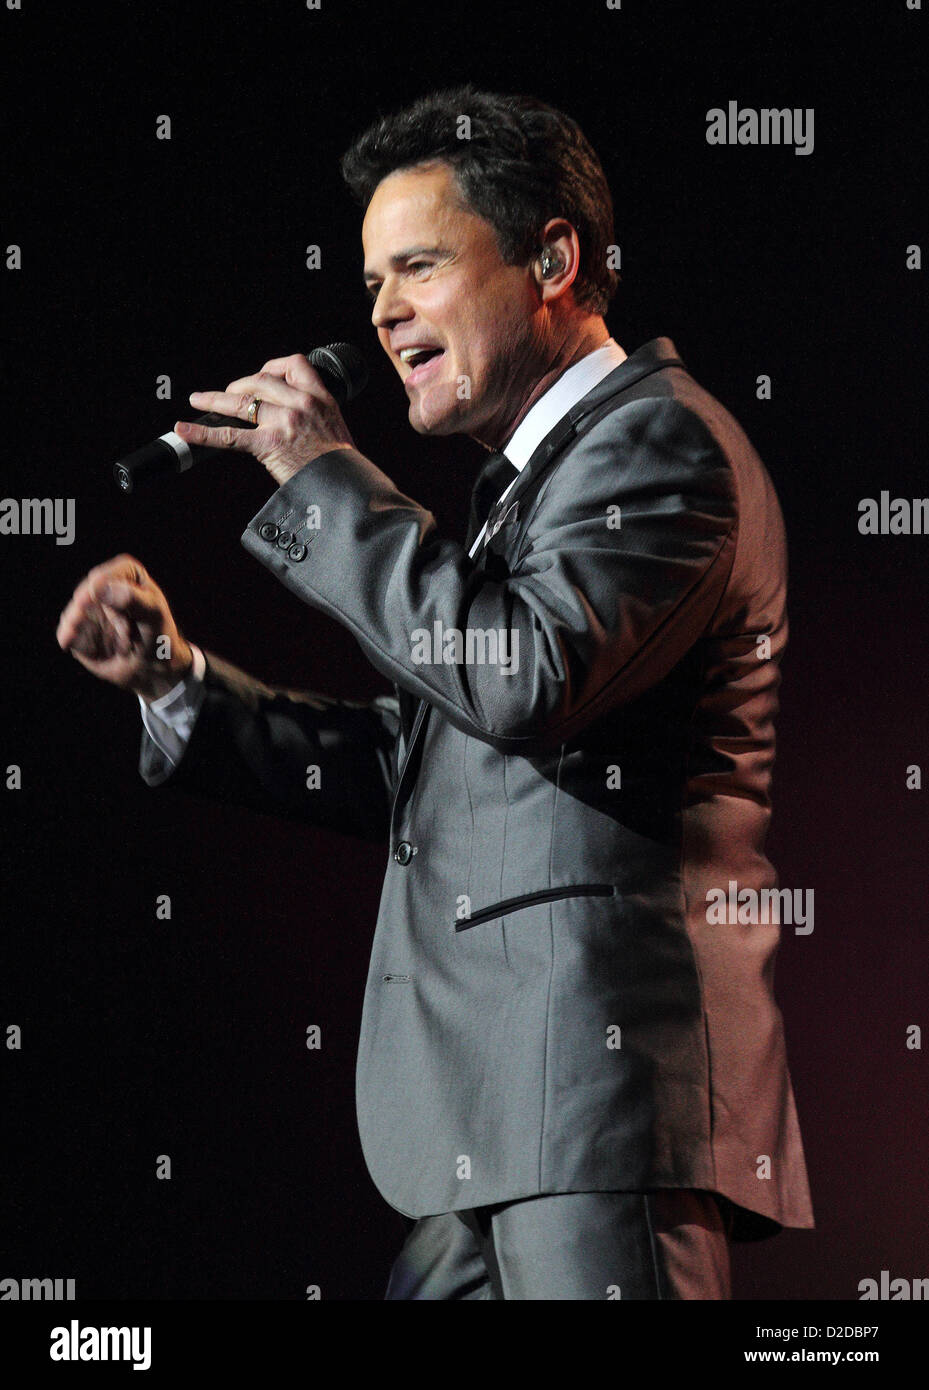 London, UK. Donny and Marie Osmond Live at the O2 Arena, London - January 20th 2013  Photo by Keith Mayhew/Alamy live news. Stock Photo